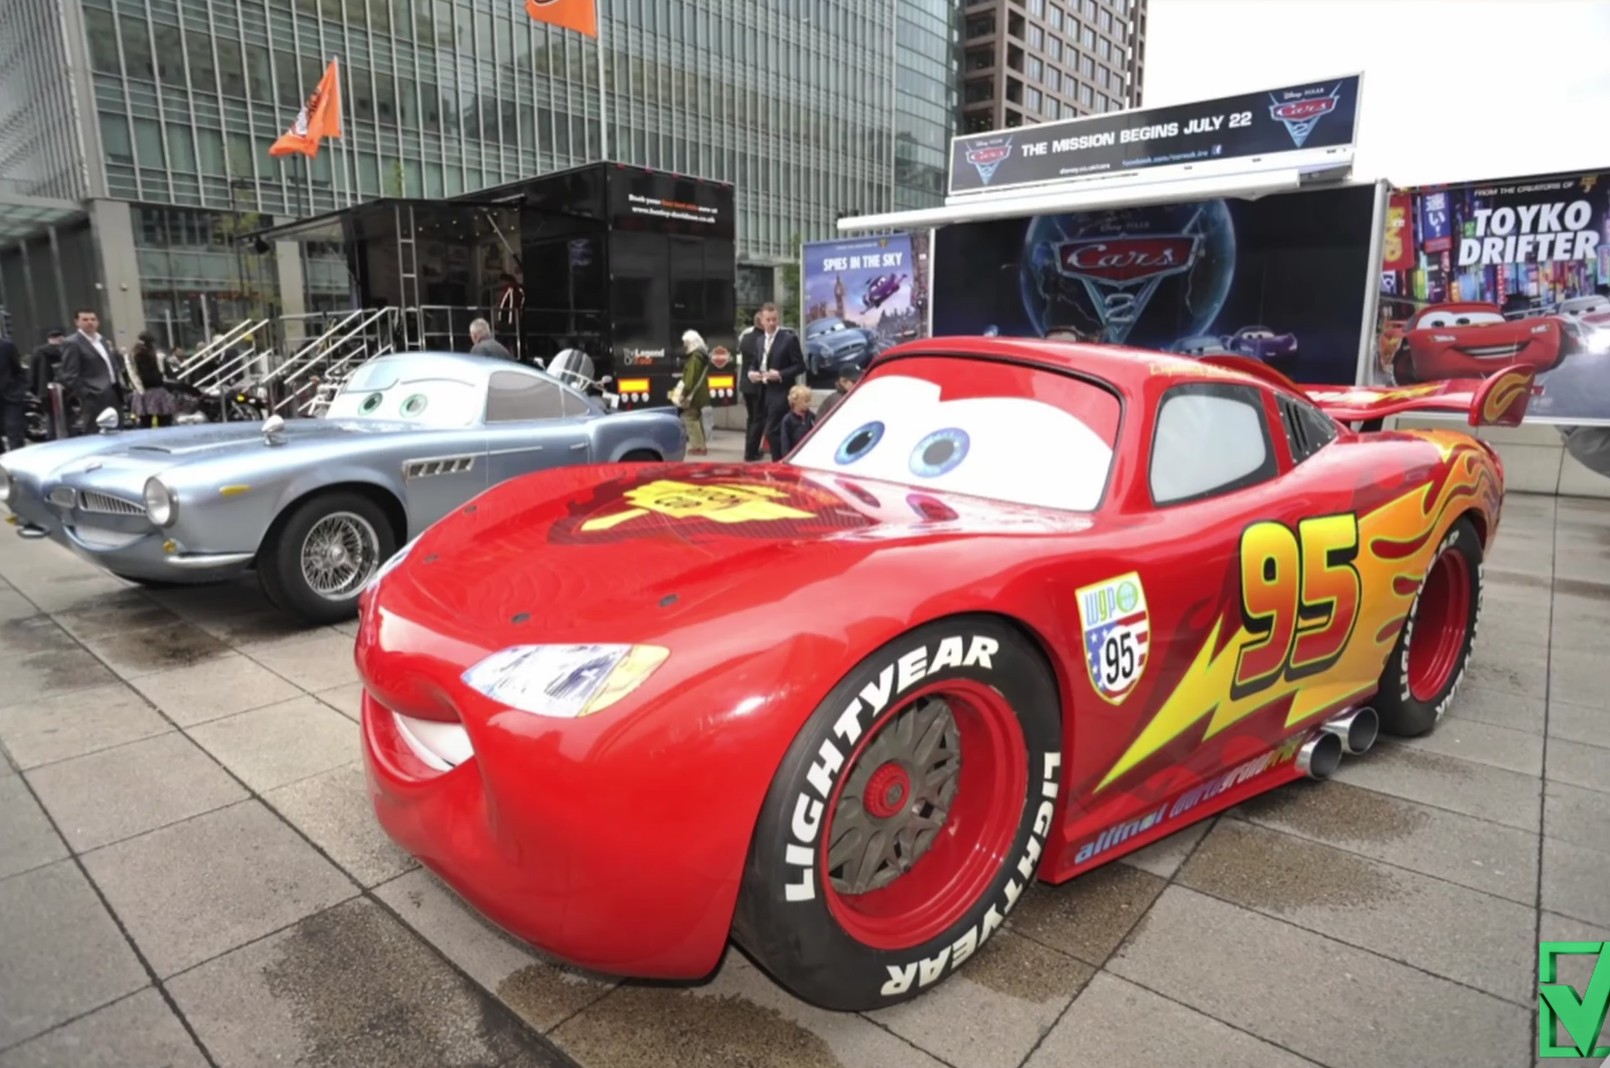 This Guy Bought the Real Lightning McQueen Barnfind From Cars for Just $750  - autoevolution